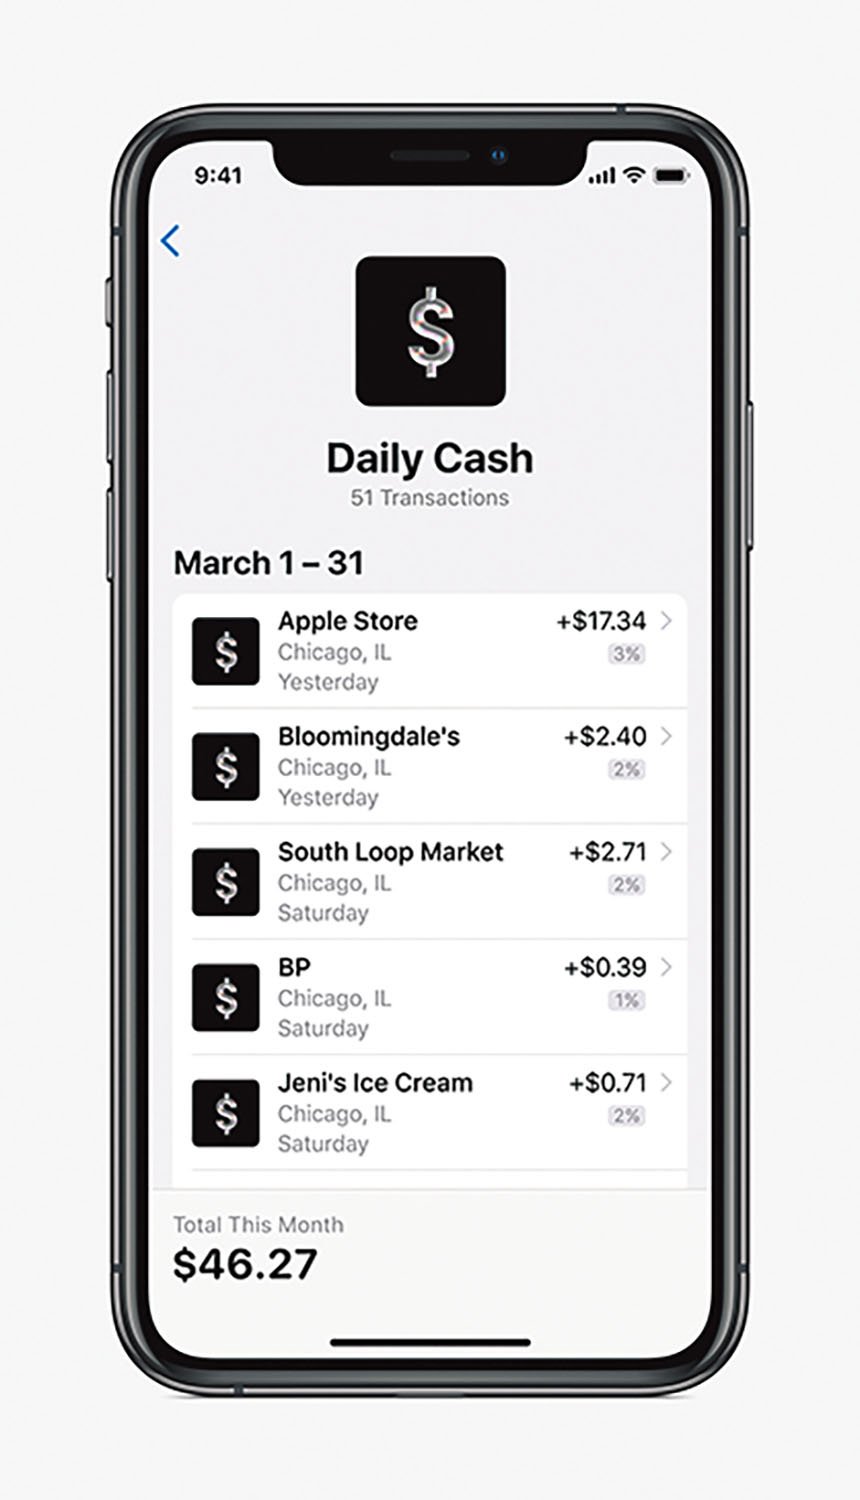 DMA-2-Apple-Card-available-today-iPhoneXs-Daily-Cash-screen-082019.jpg